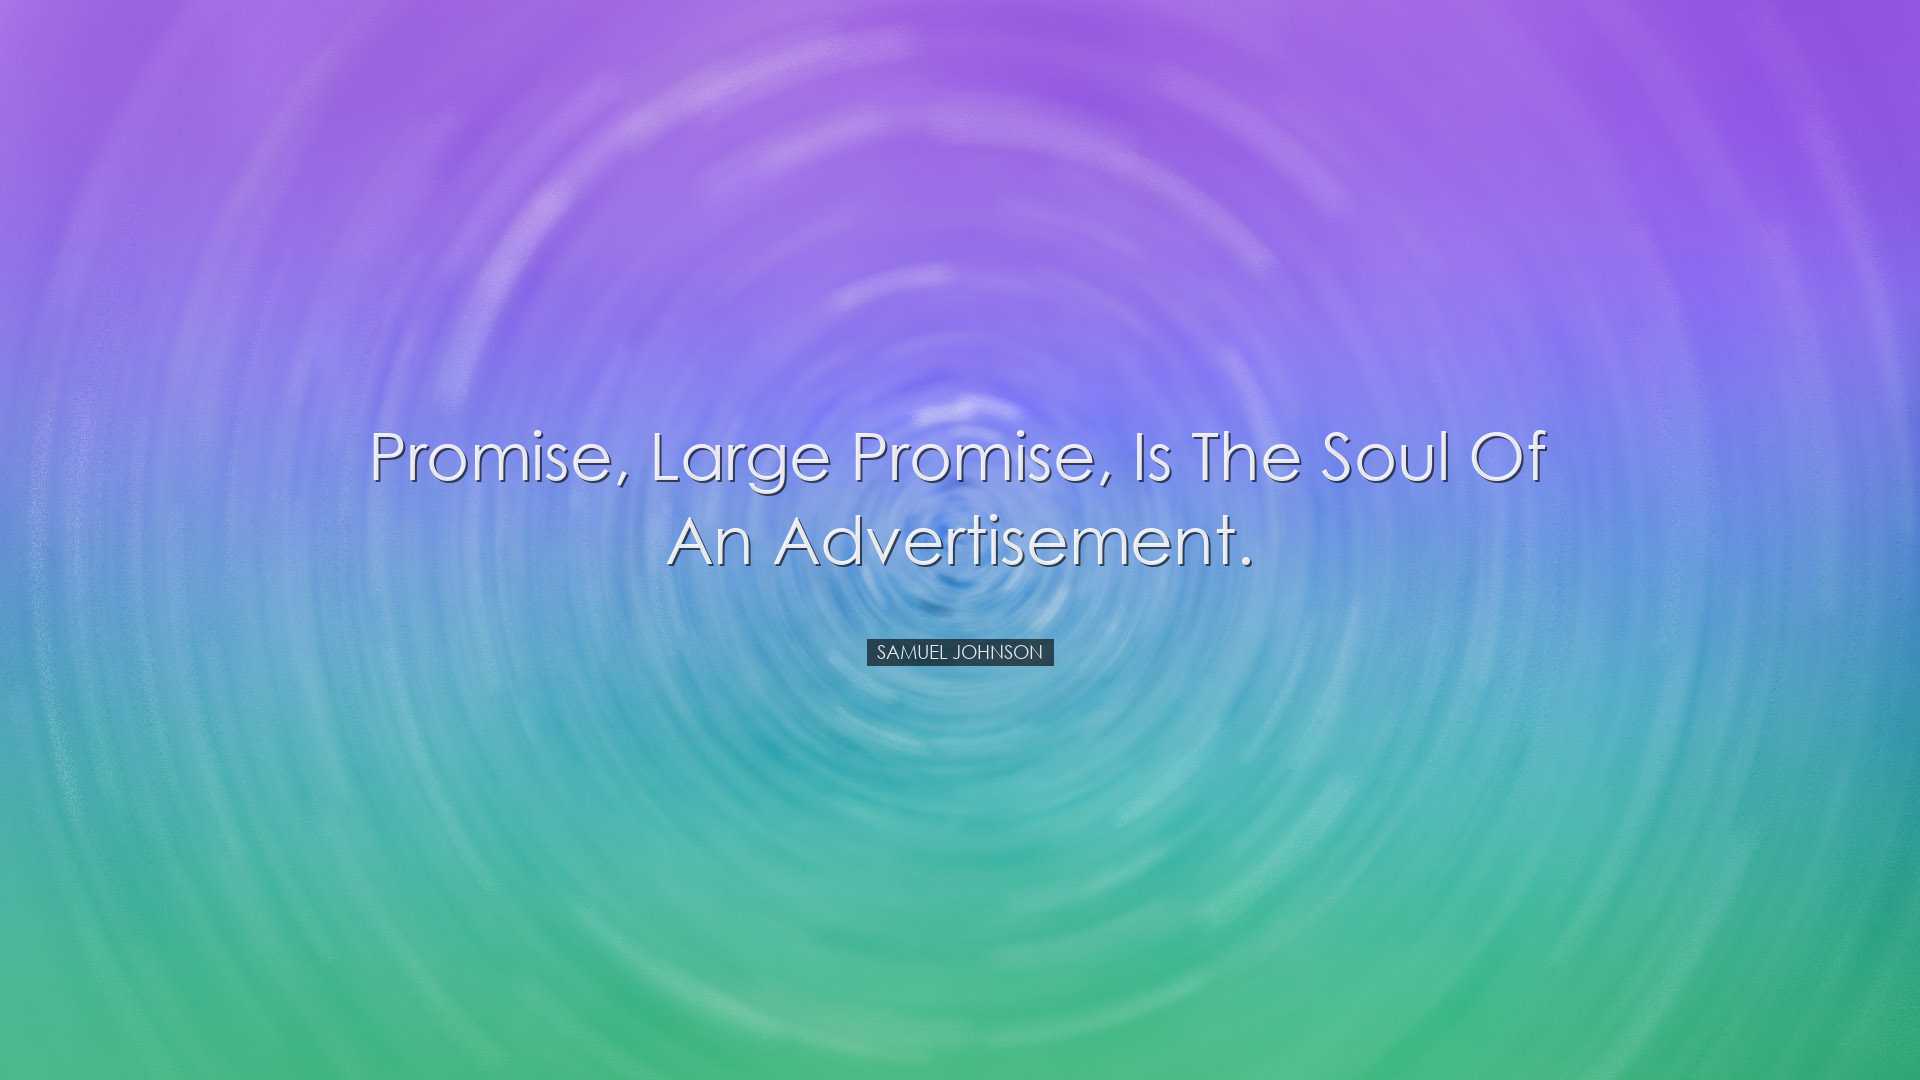 Promise, large promise, is the soul of an advertisement. - Samuel